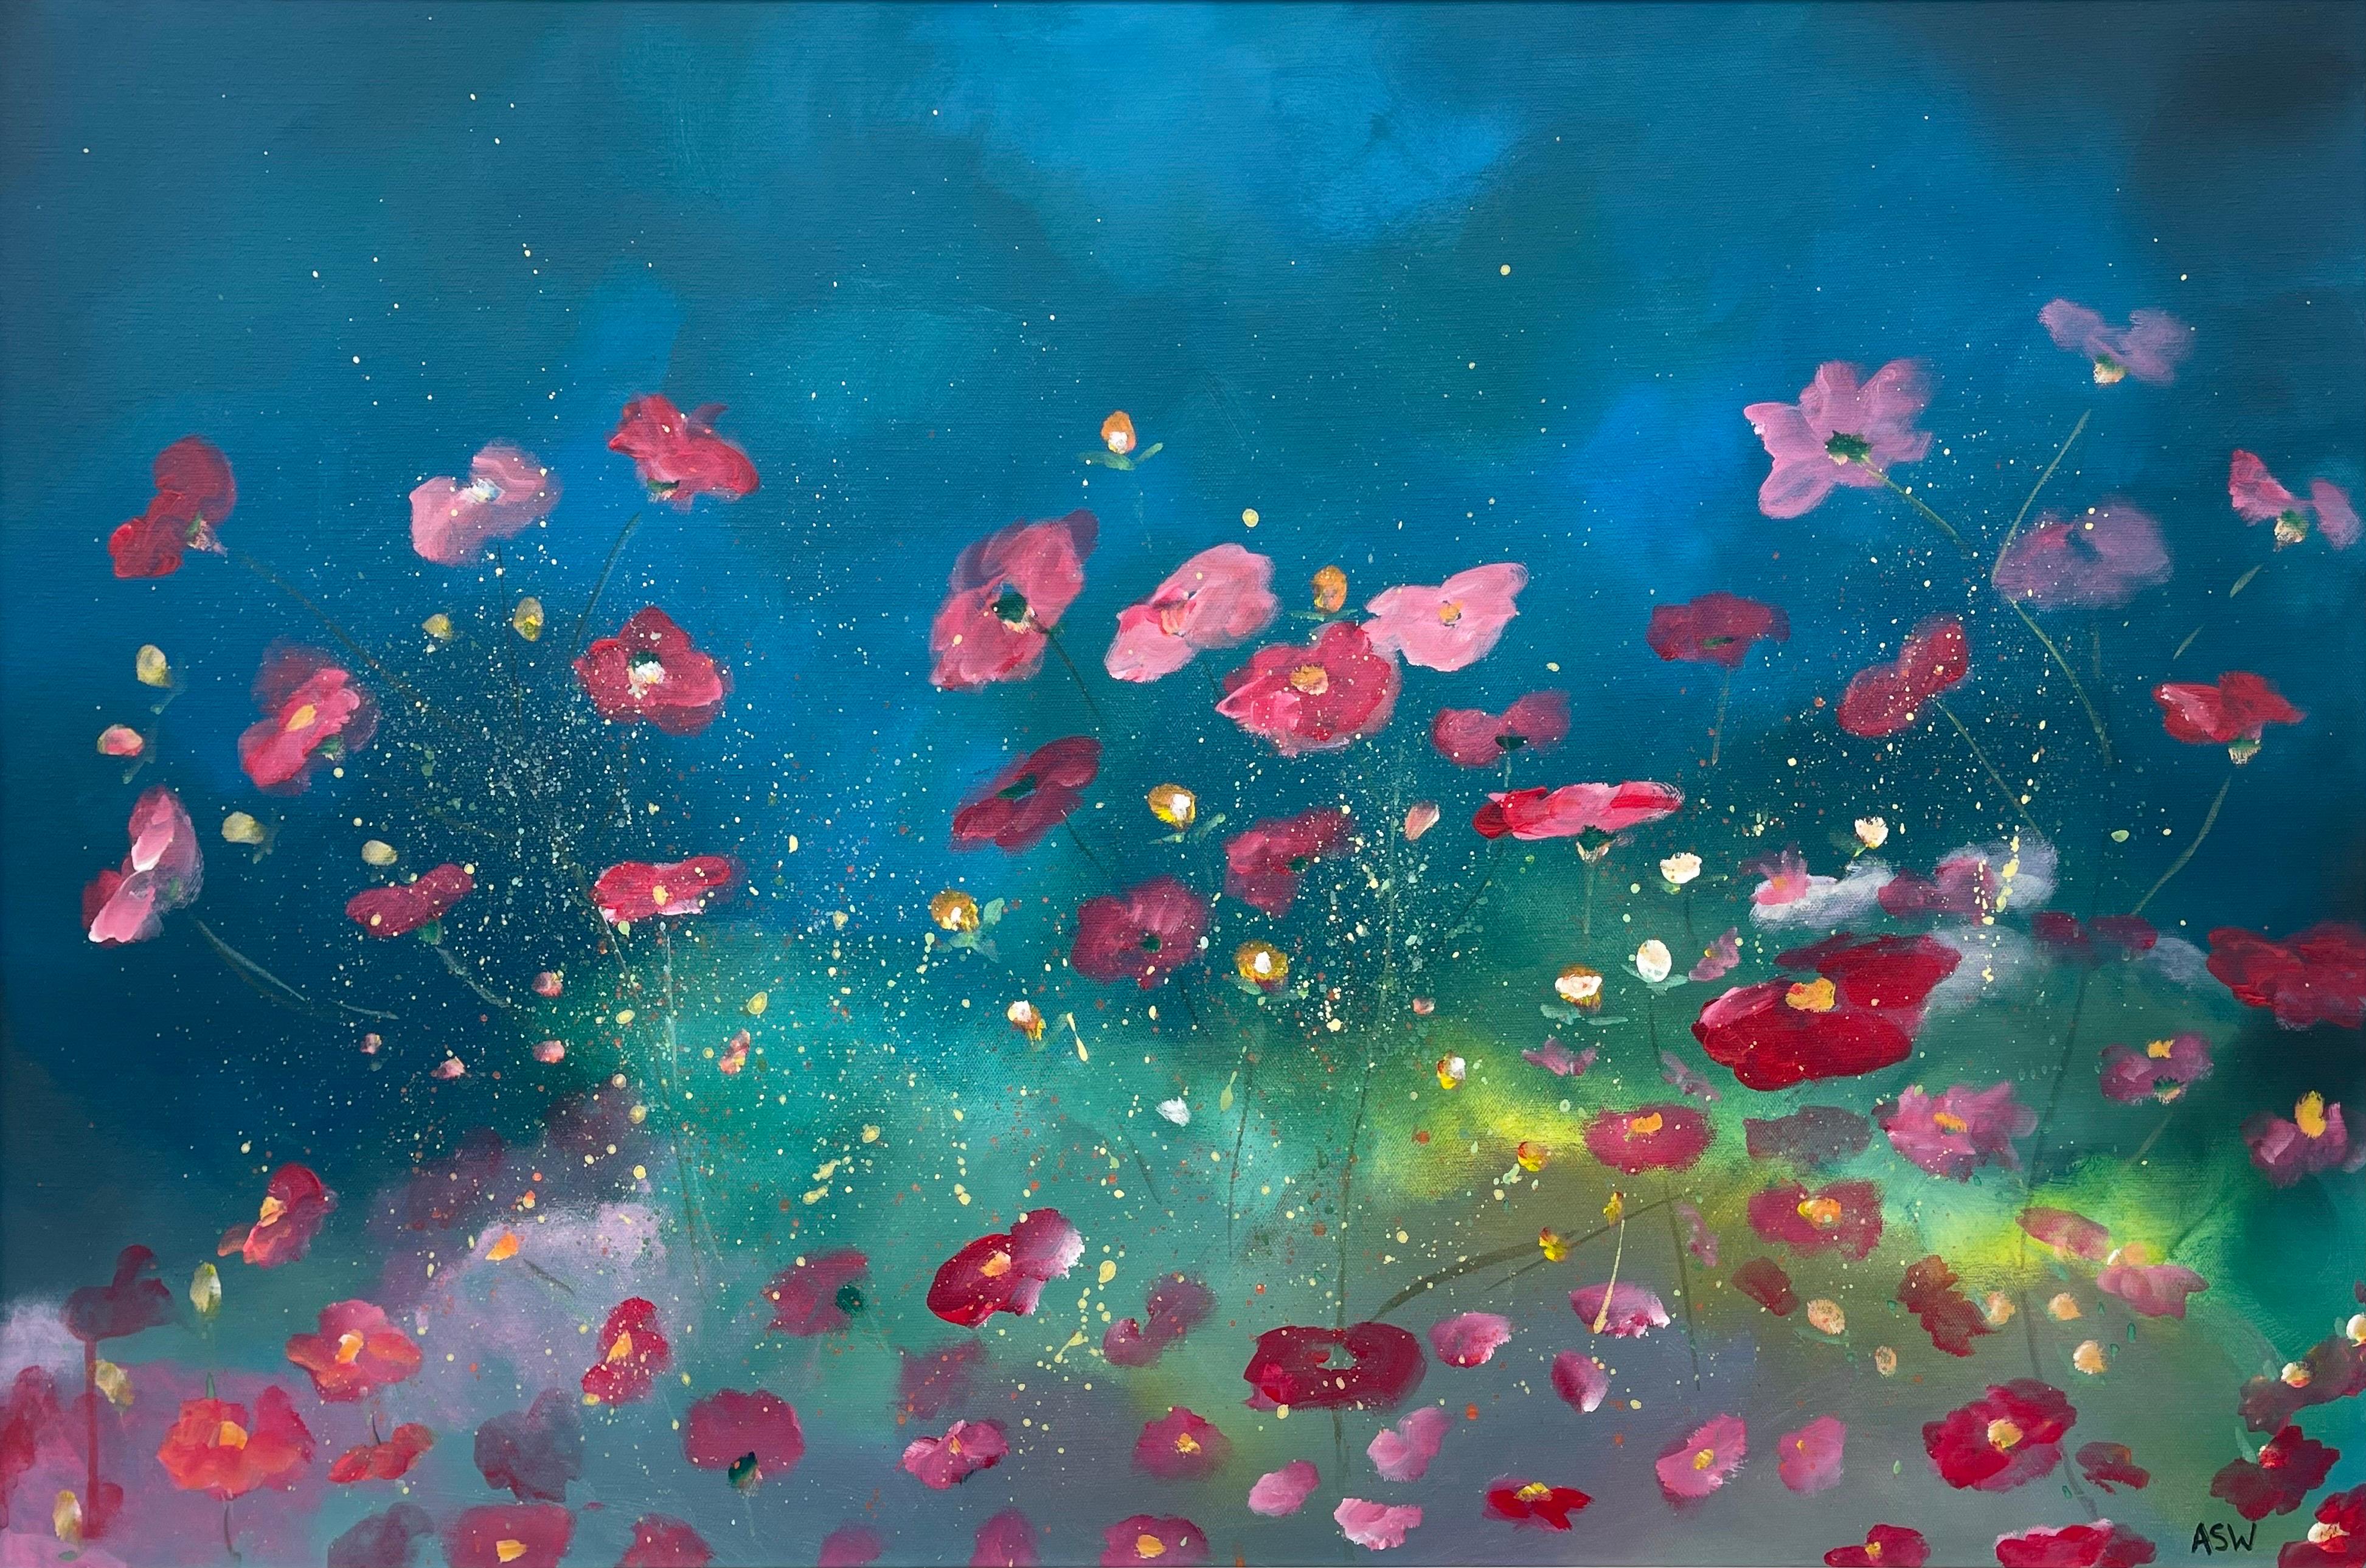 Painting of Wild Red & Pink Flowers on a Turquoise & Green Abstract Background by Contemporary British Artist, Angela Wakefield. 

Art measures 36 x 24 inches
Frame measures 42 x 30 inches 

Presented in the highest quality hand-finished off-white